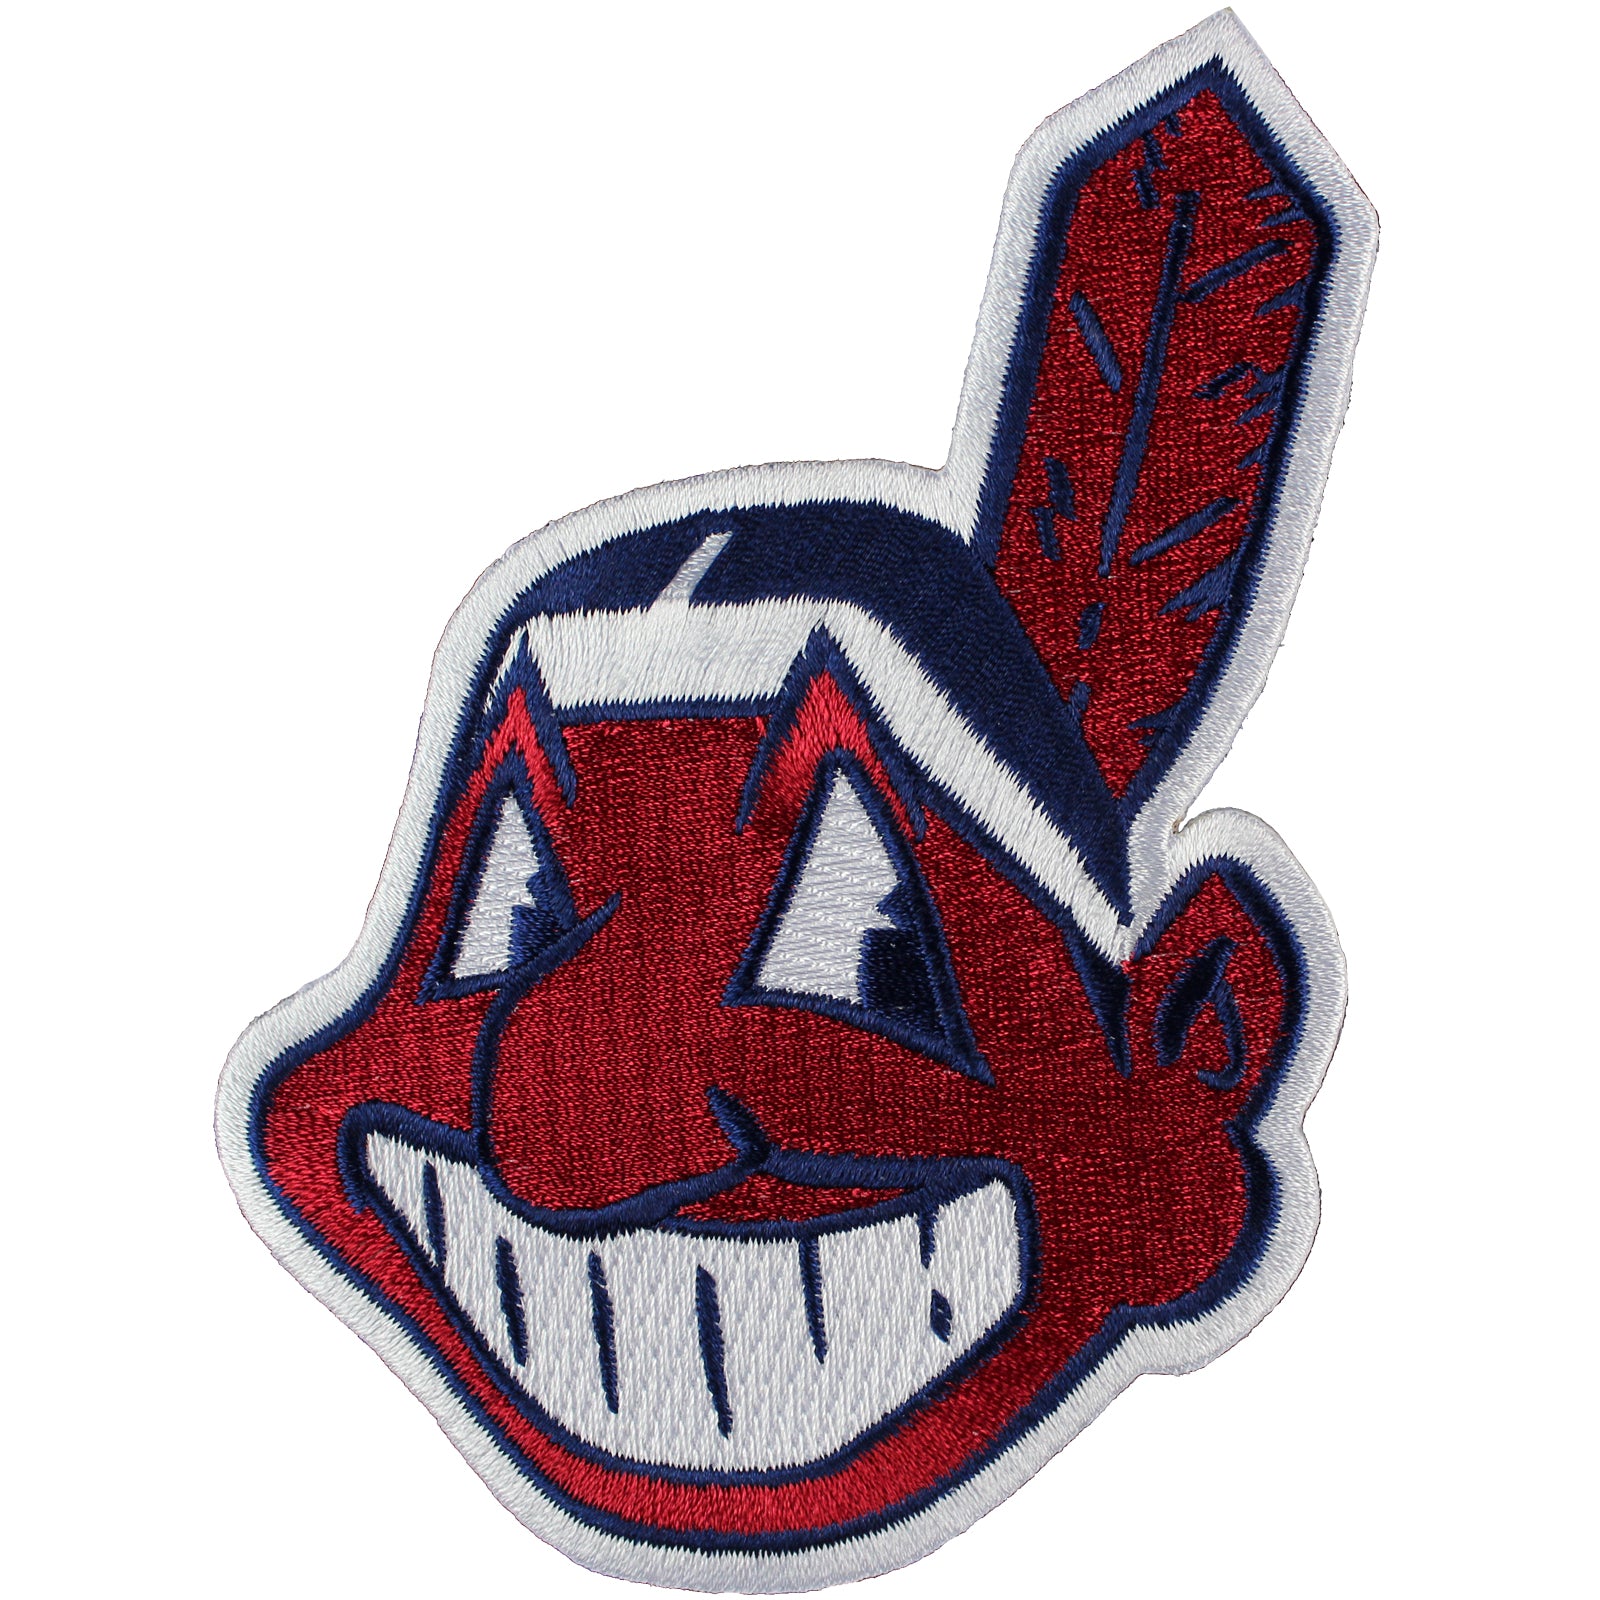 Chief Wahoo Forever Vinyl Decal - PatchOps